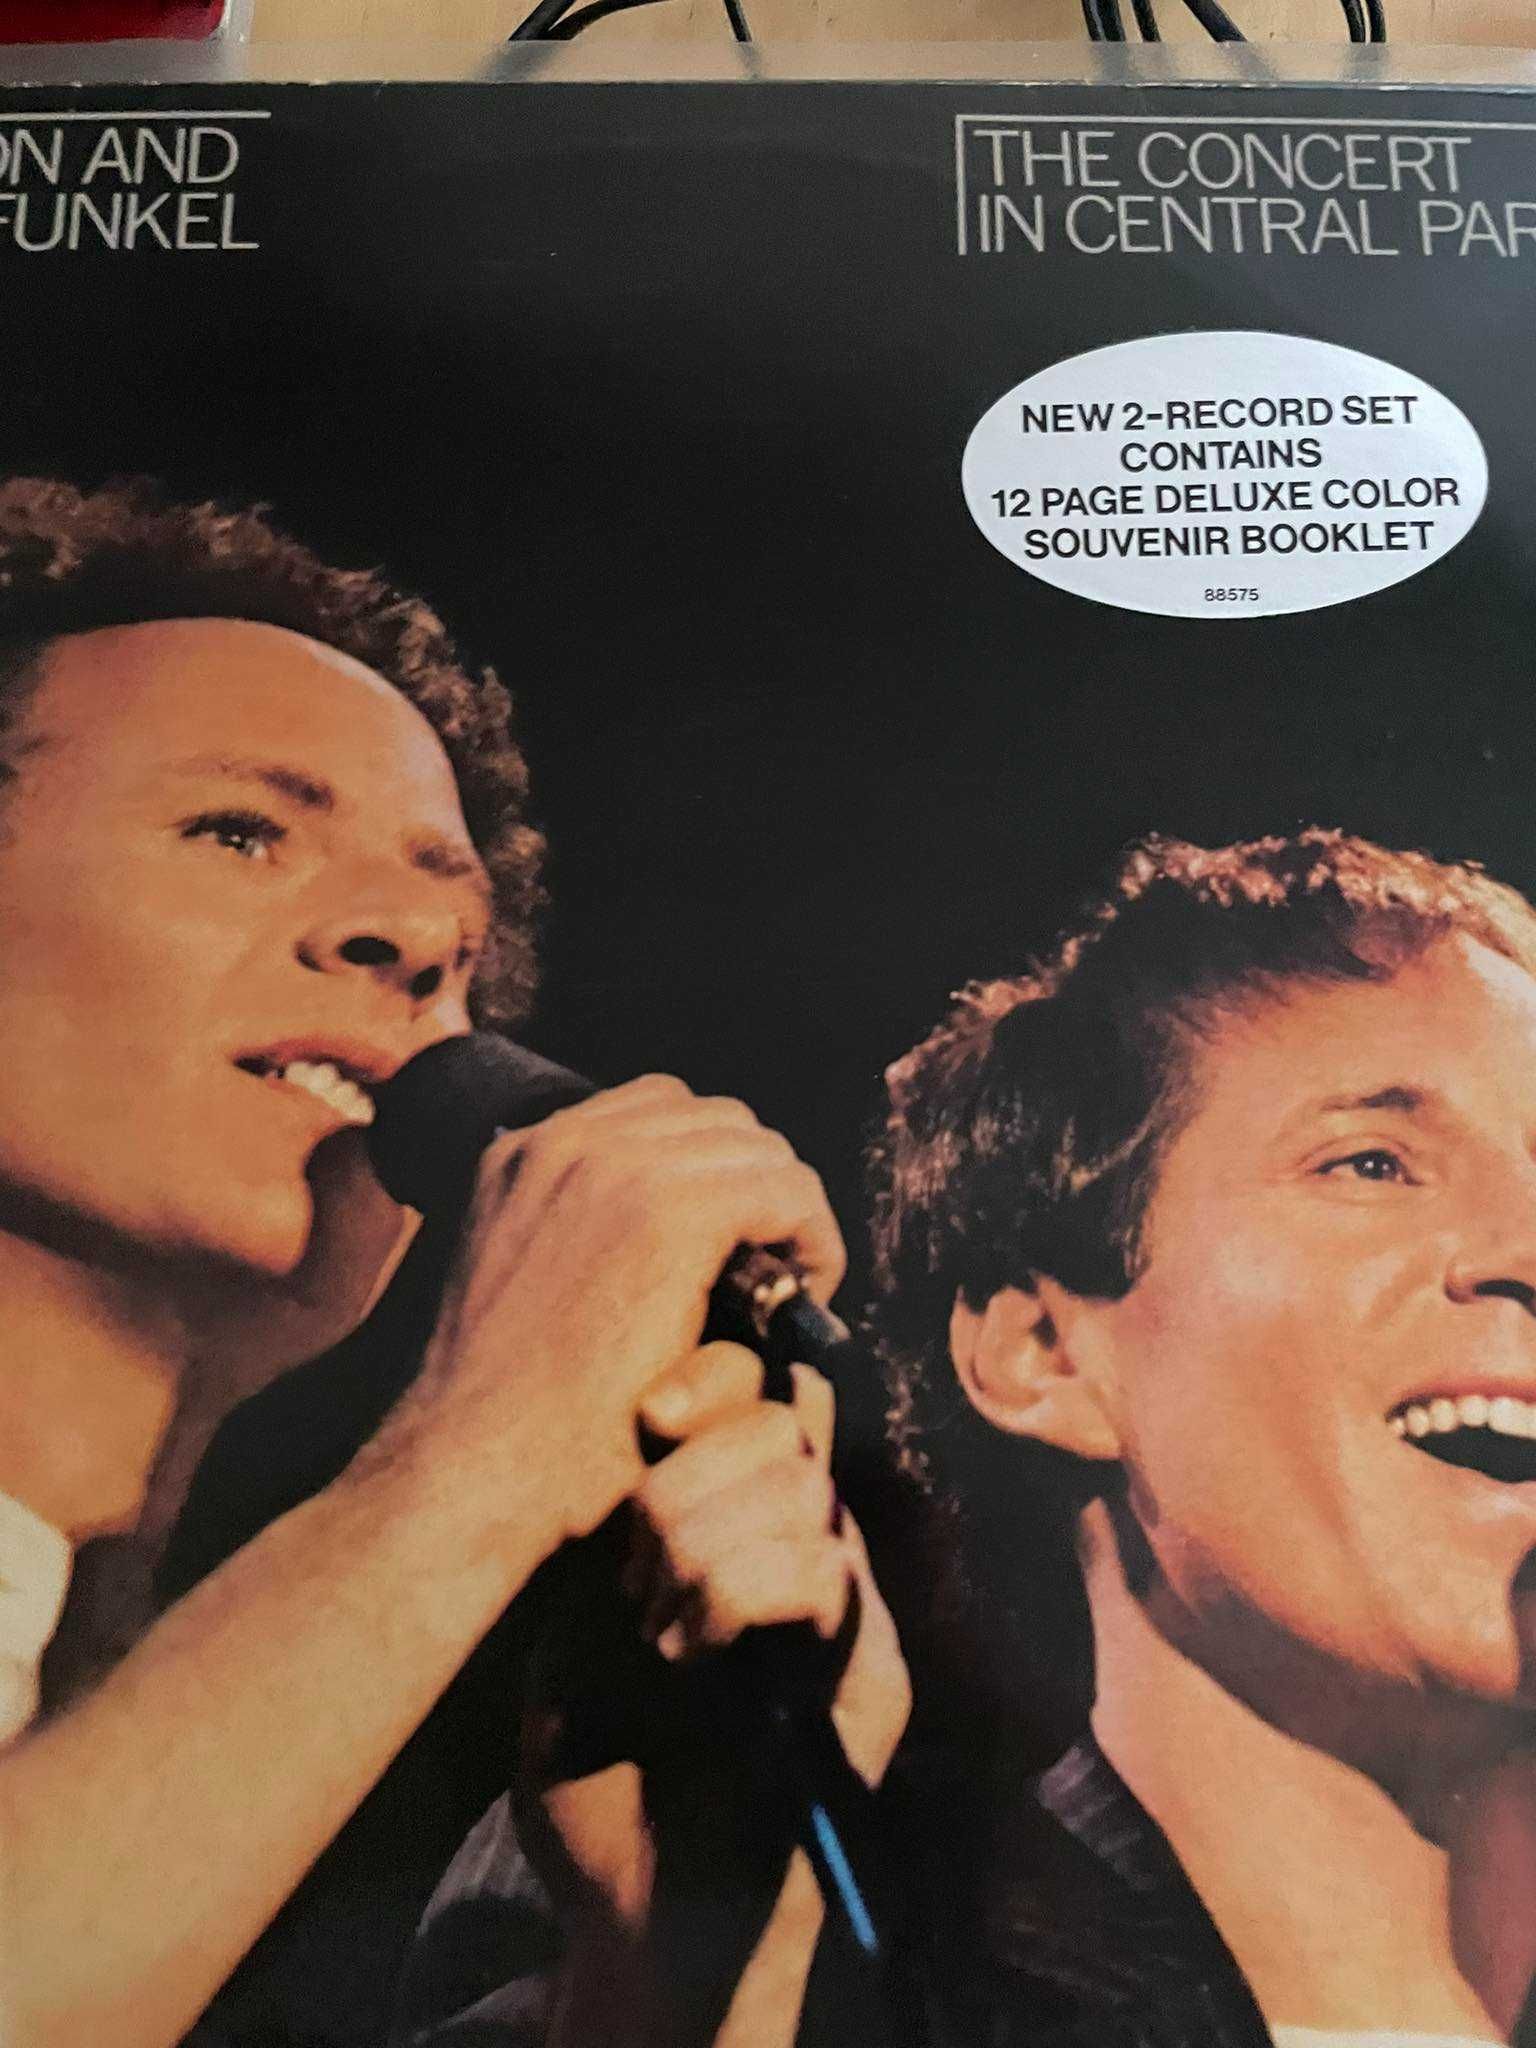 Simon And Garfunkel – The Concert In Central Park